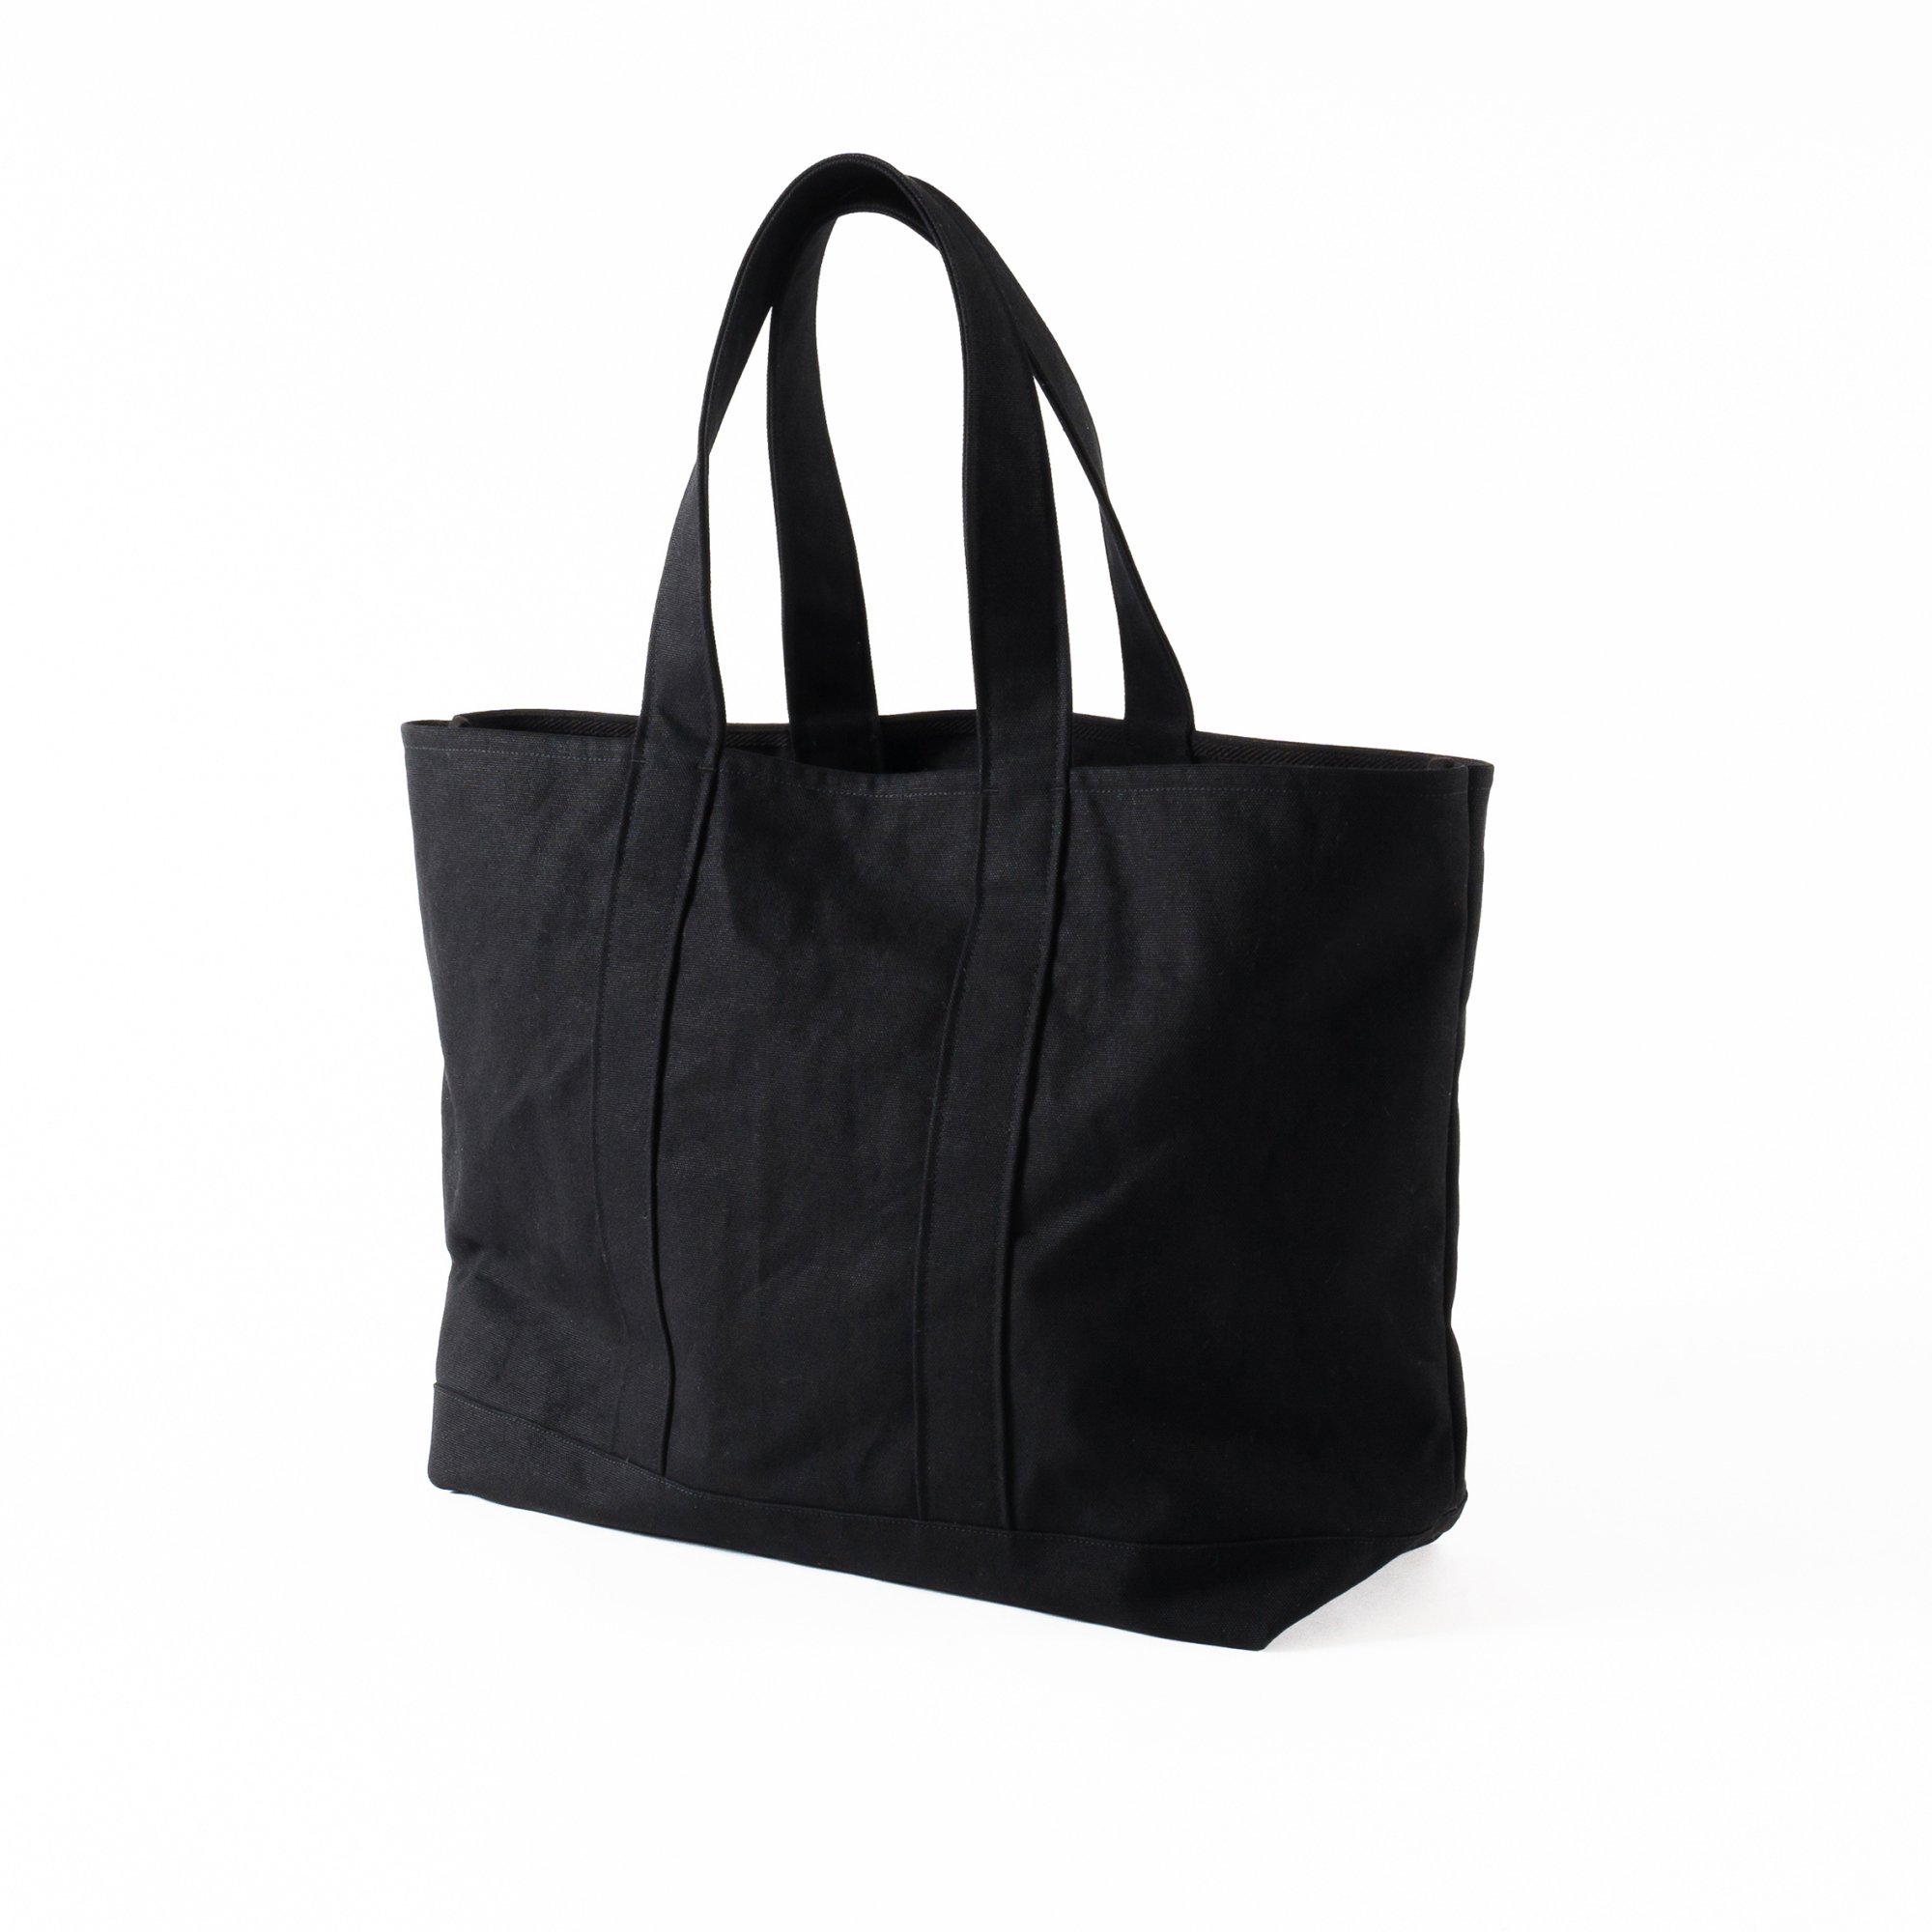 BLUFCAMP<br />Printed Tote Bag-15oz Canvas / Black<img class='new_mark_img2' src='https://img.shop-pro.jp/img/new/icons14.gif' style='border:none;display:inline;margin:0px;padding:0px;width:auto;' />